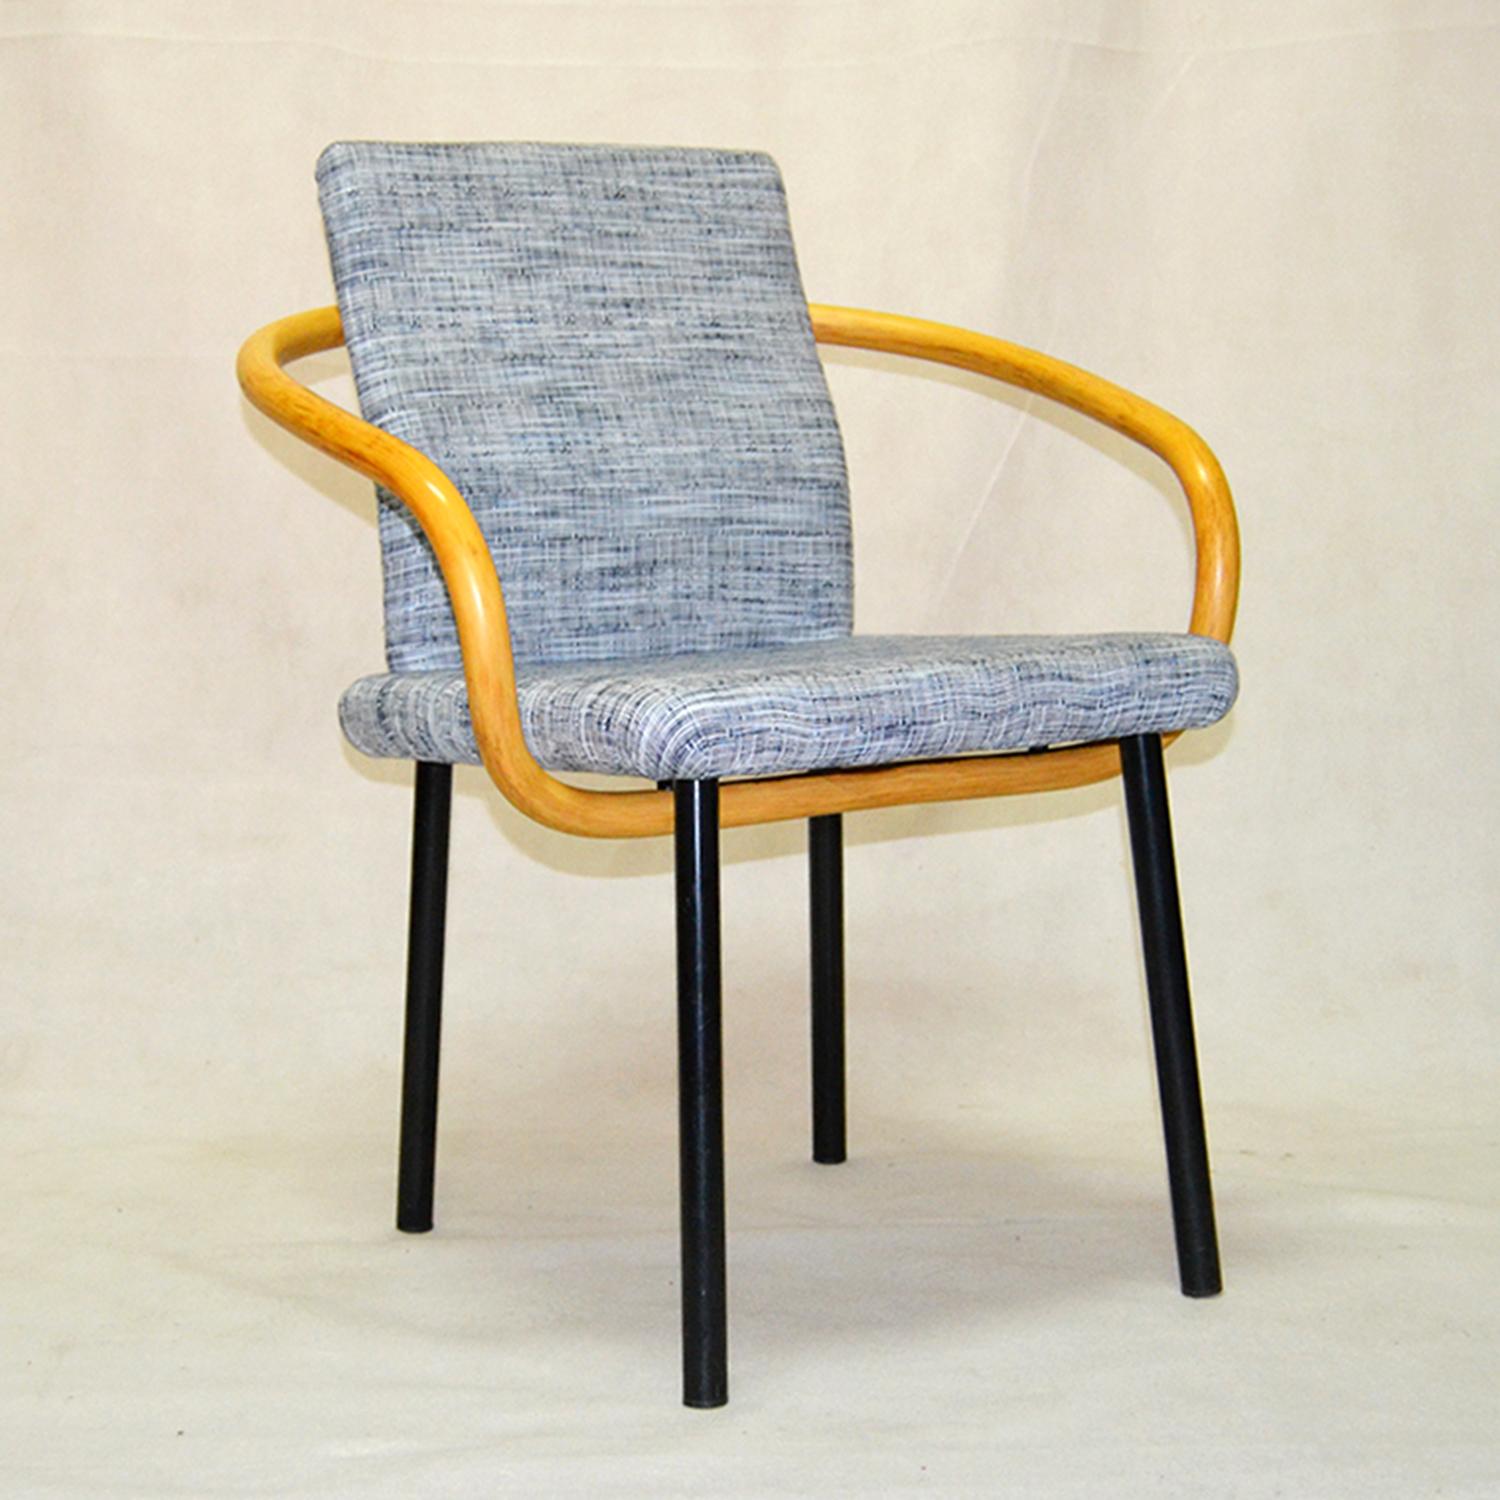 Set of eight Mandarin chairs by Ettore Sottsass edited by Knoll
Furniture designed by Ettore Sottsass edited by Knoll, Italy
circa 1980, Italy
Good vintage condition
Documentation: attached “Certificate of Authenticity”
The Mandarin chair was